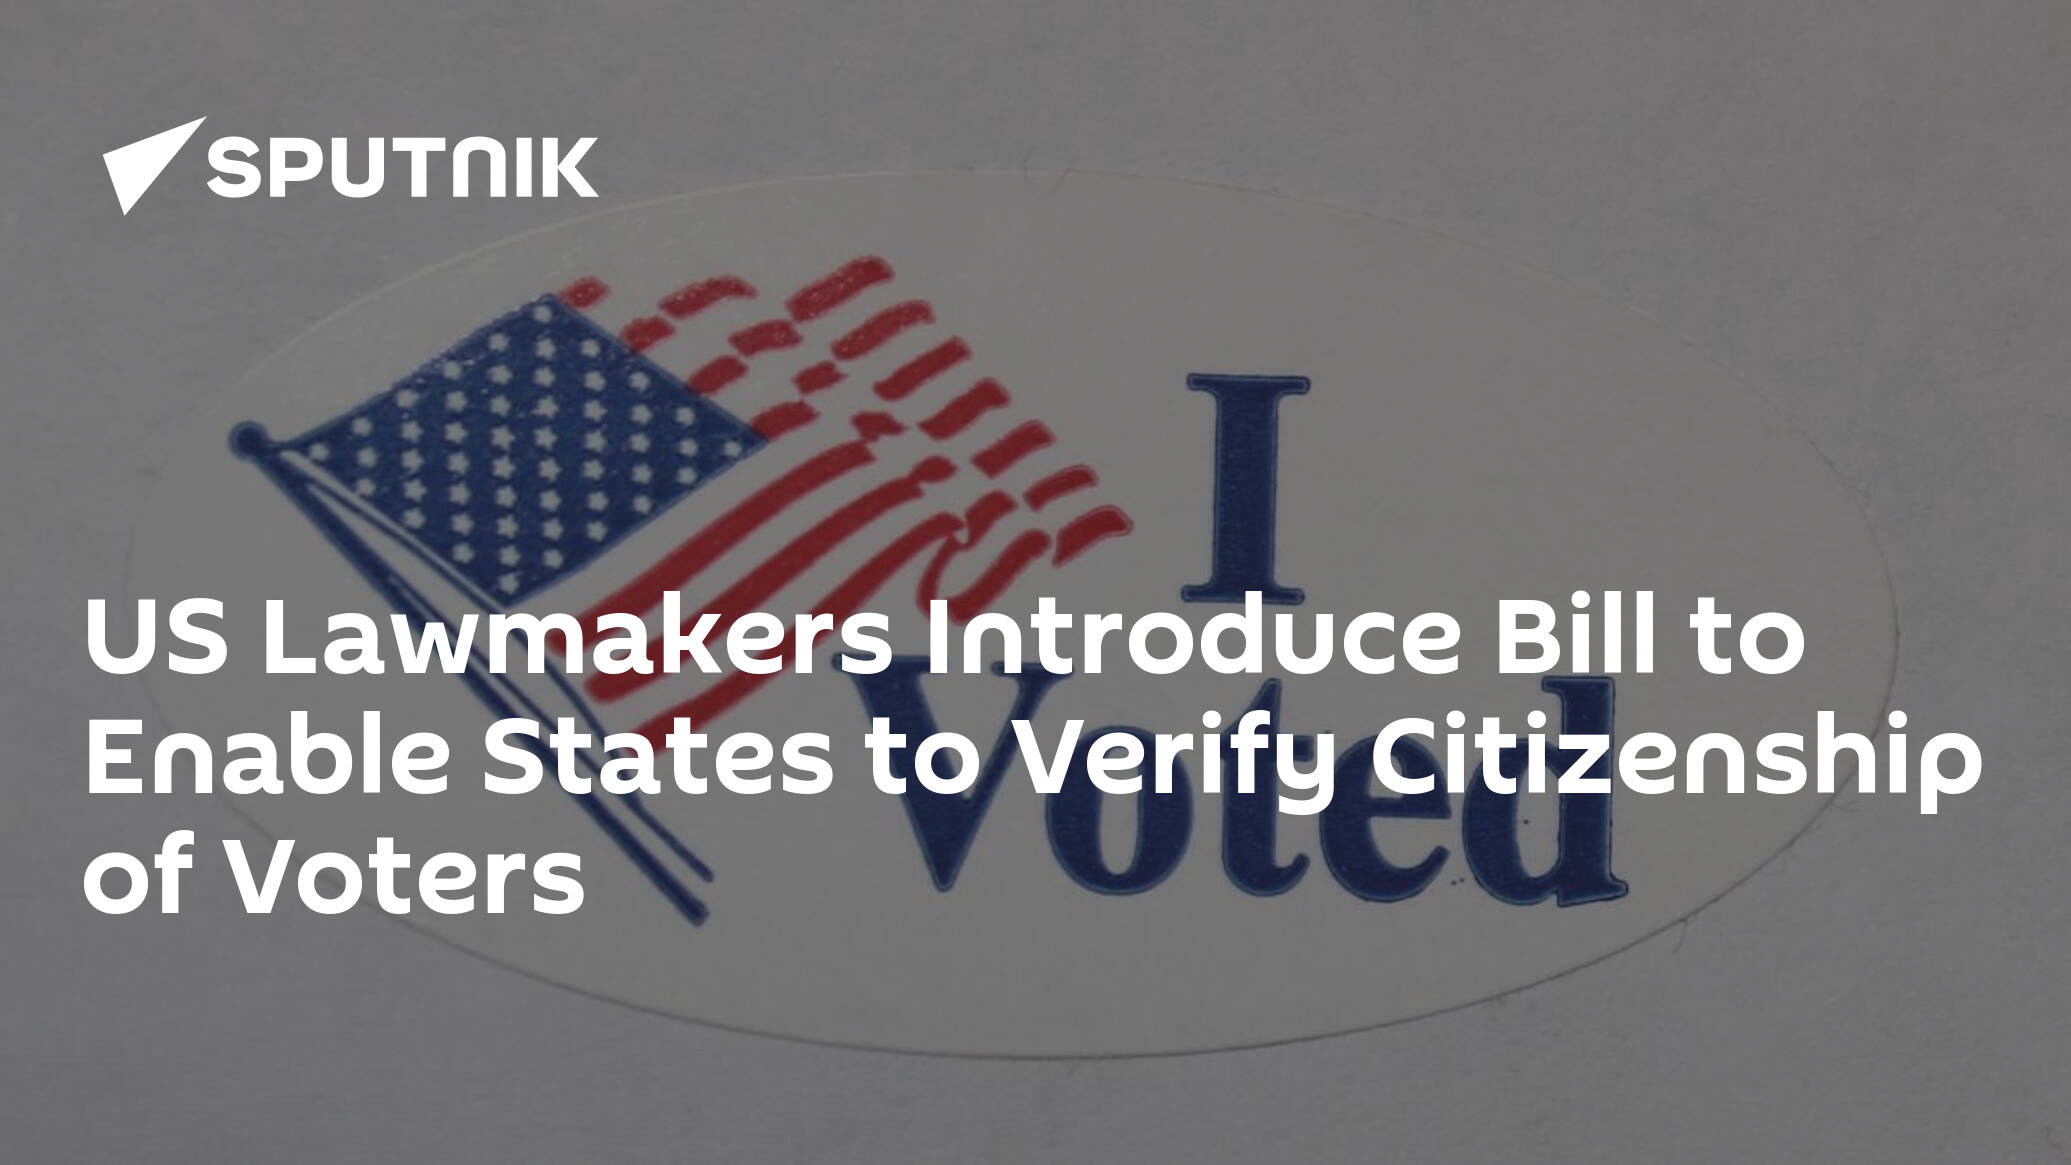 US Lawmakers Introduce Bill to Enable States to Verify Citizenship of Voters